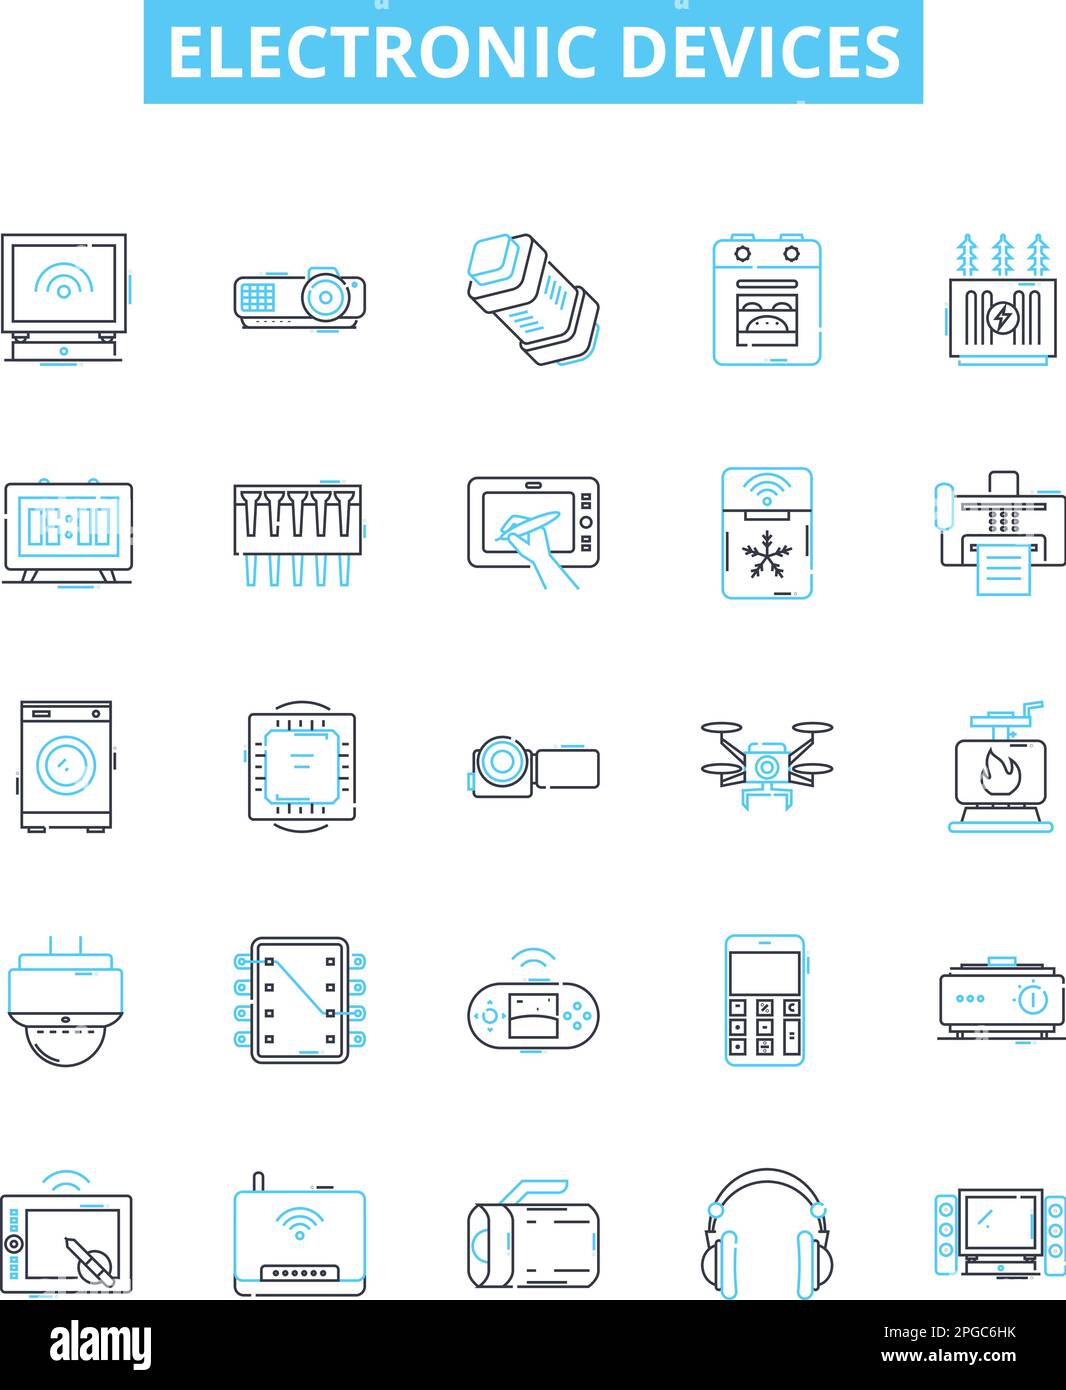 Electronic devices vector line icons set. Electronics, Devices, Digital, Components, Computers, Tablets, Phones illustration outline concept symbols Stock Vector